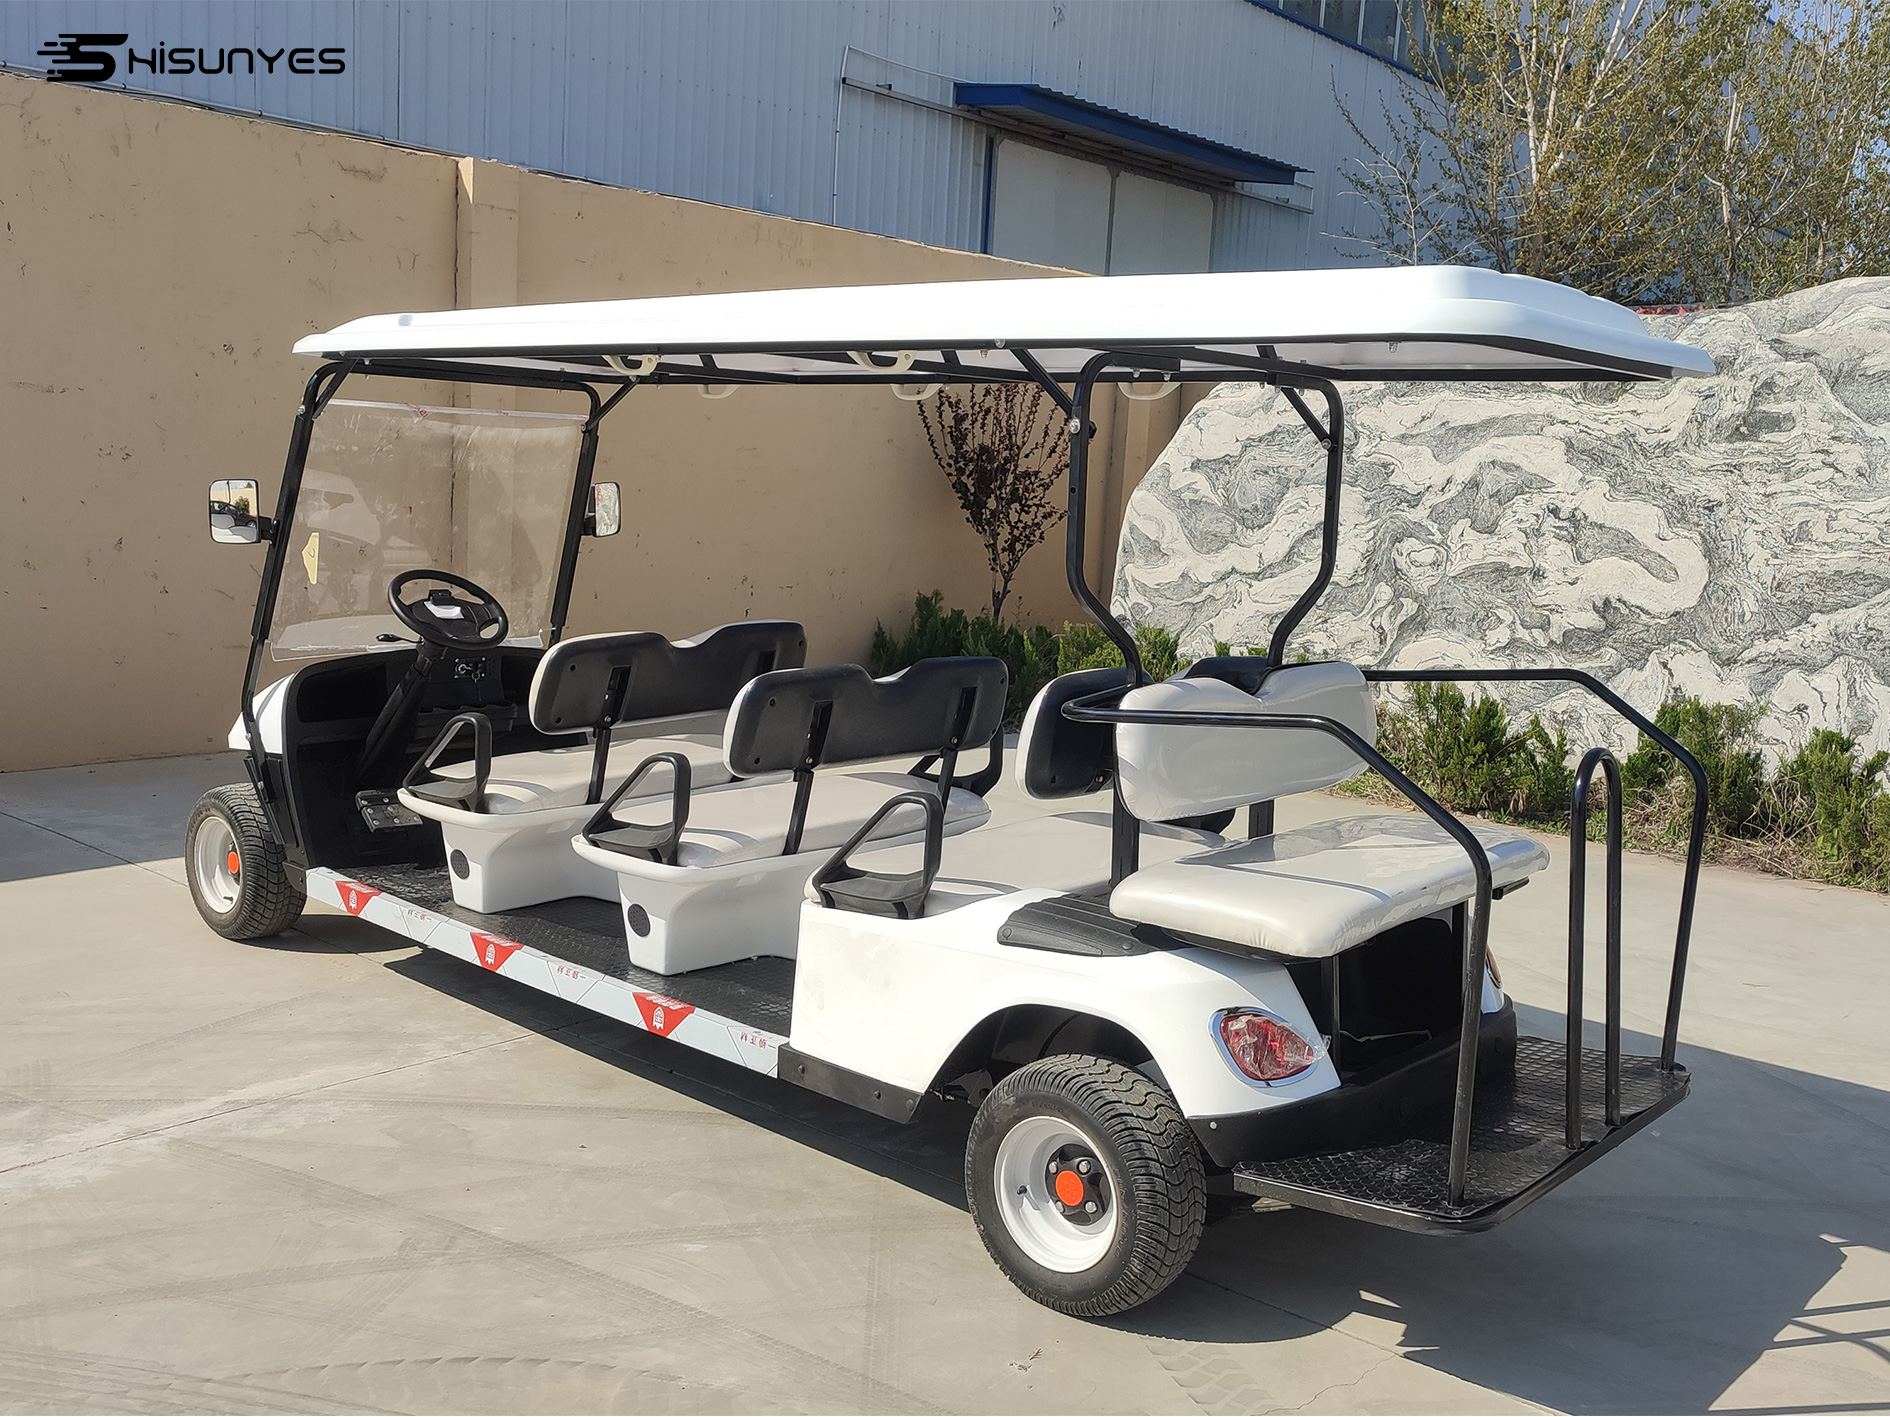 The new 8 Seats Electric Golf Club Cart.